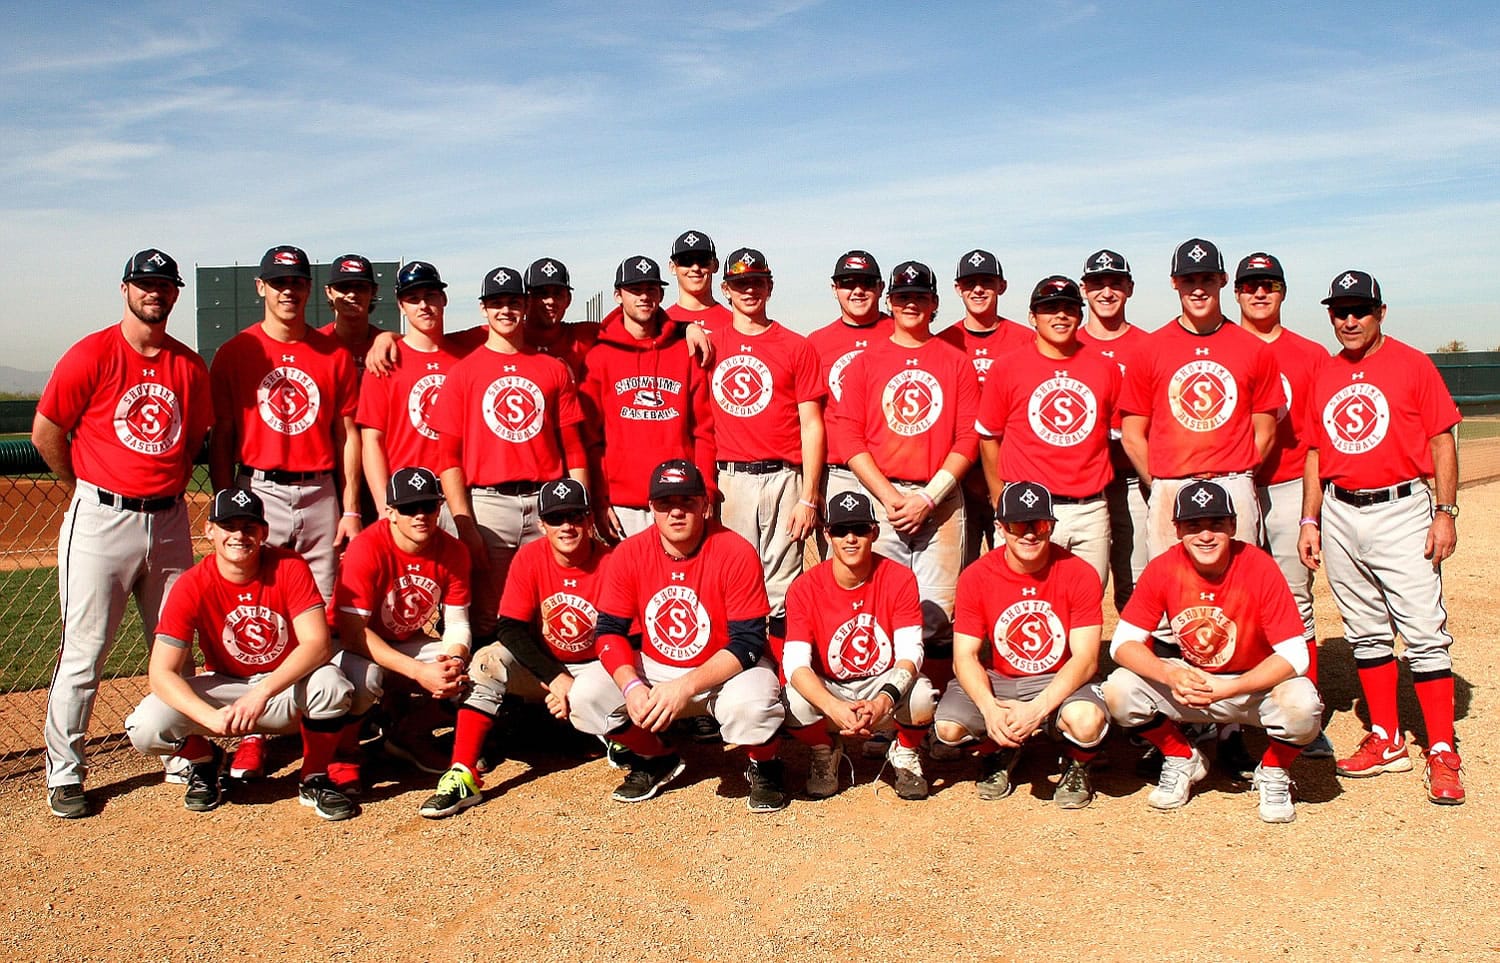 Showtime Baseball went 3-1 at the Perfect Game under 18 MLK Tournament in Glendale, Ariz.